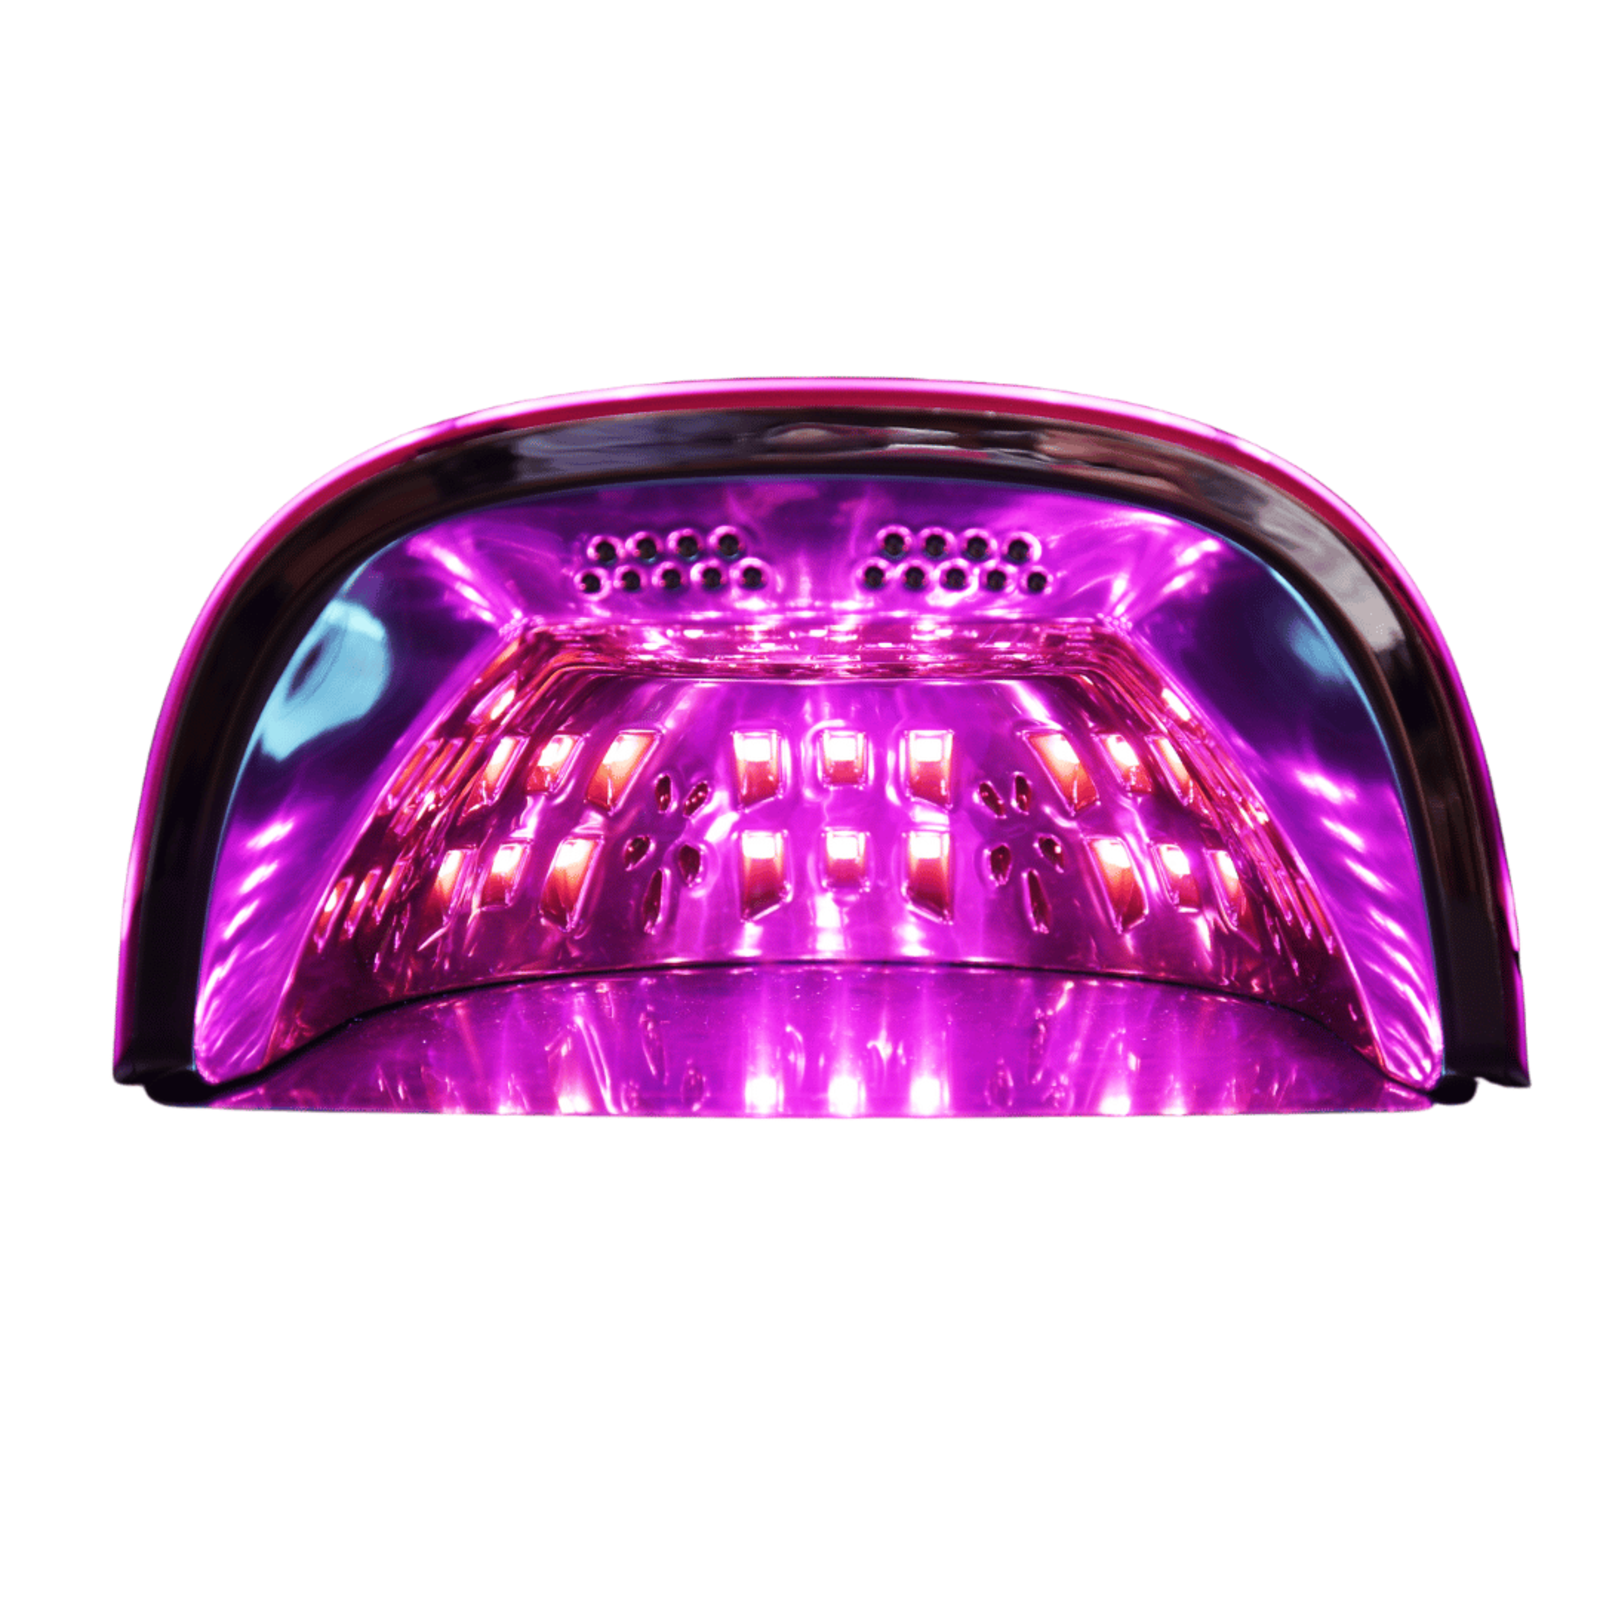 Urban nails Cordless rechargeable uv/led lamp